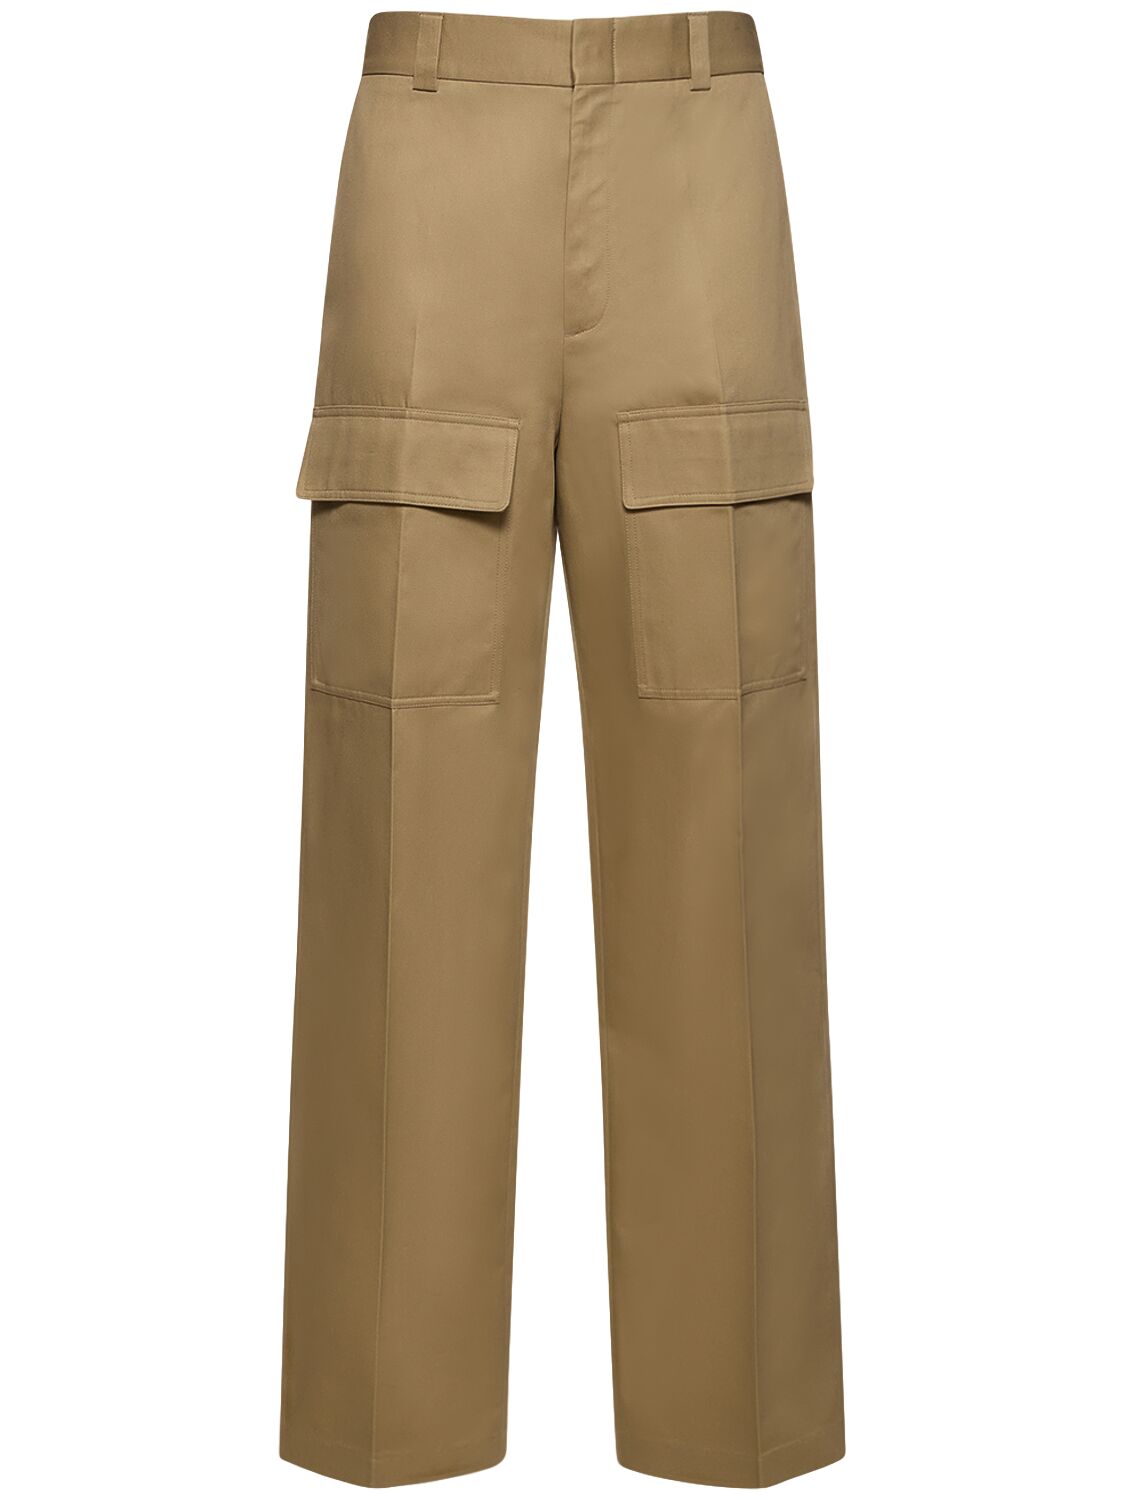 Image of Military Cotton Drill Cargo Pants